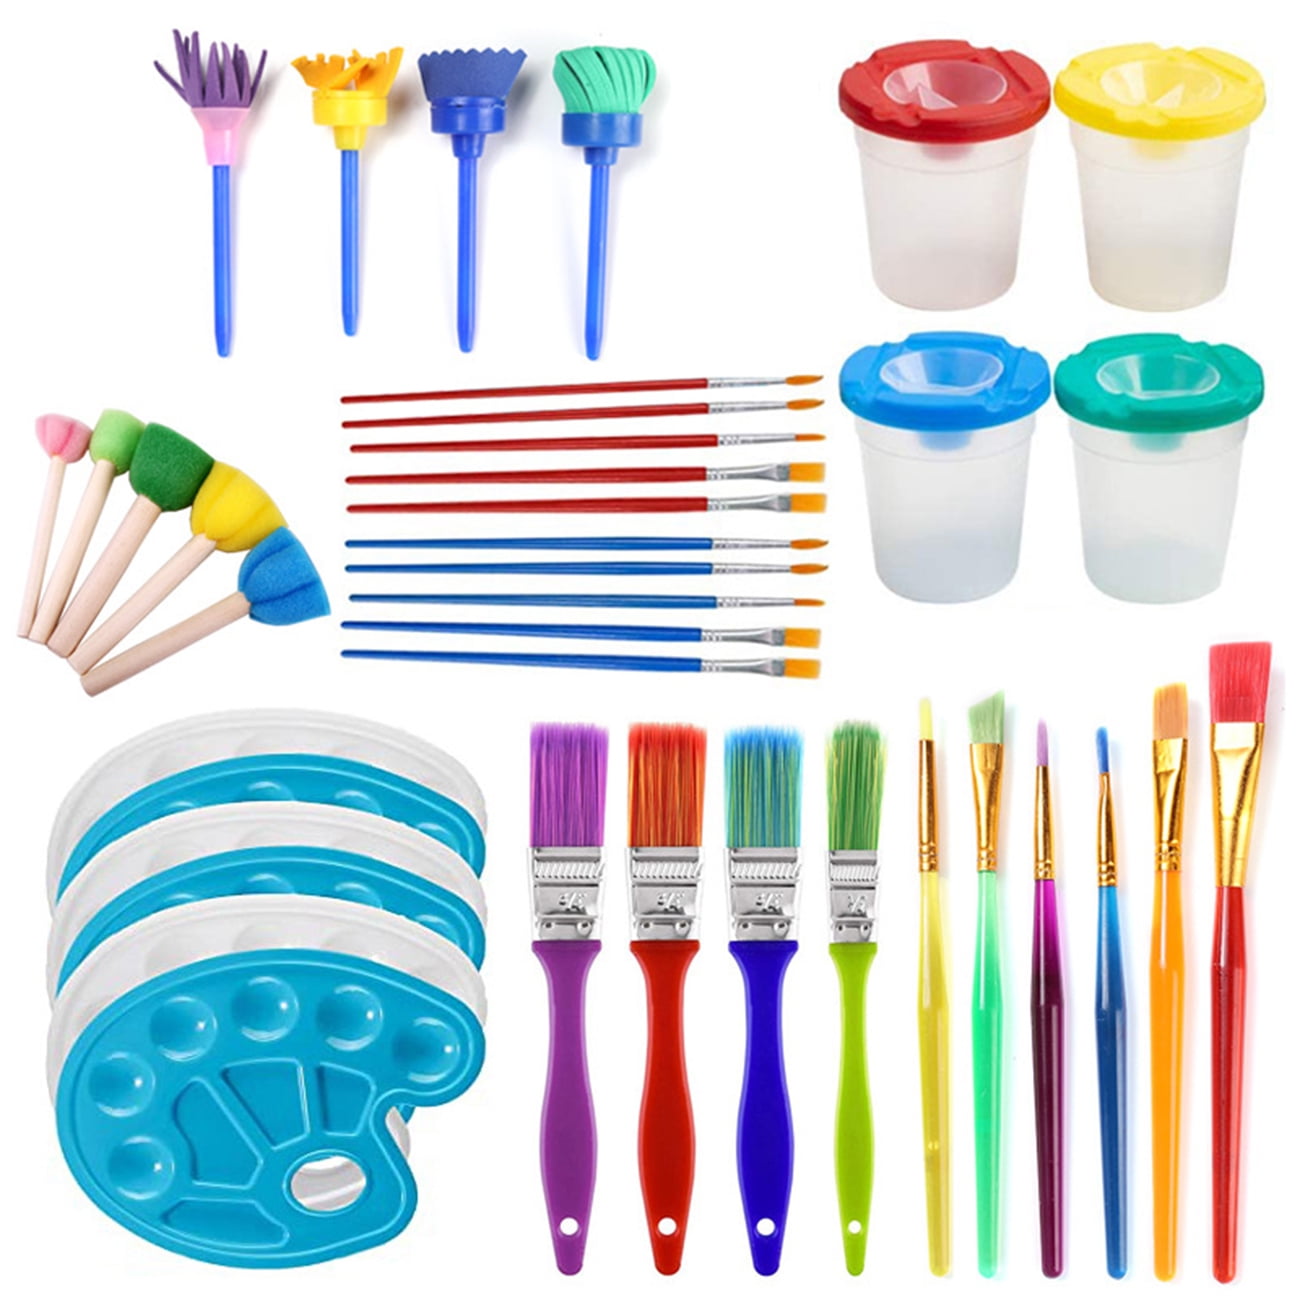 Foam Art Craft Drawing Tools Children Early DIY Learning Paint Sets 32pcs  Kids Paint Sponges Set With Waterproof Apron And